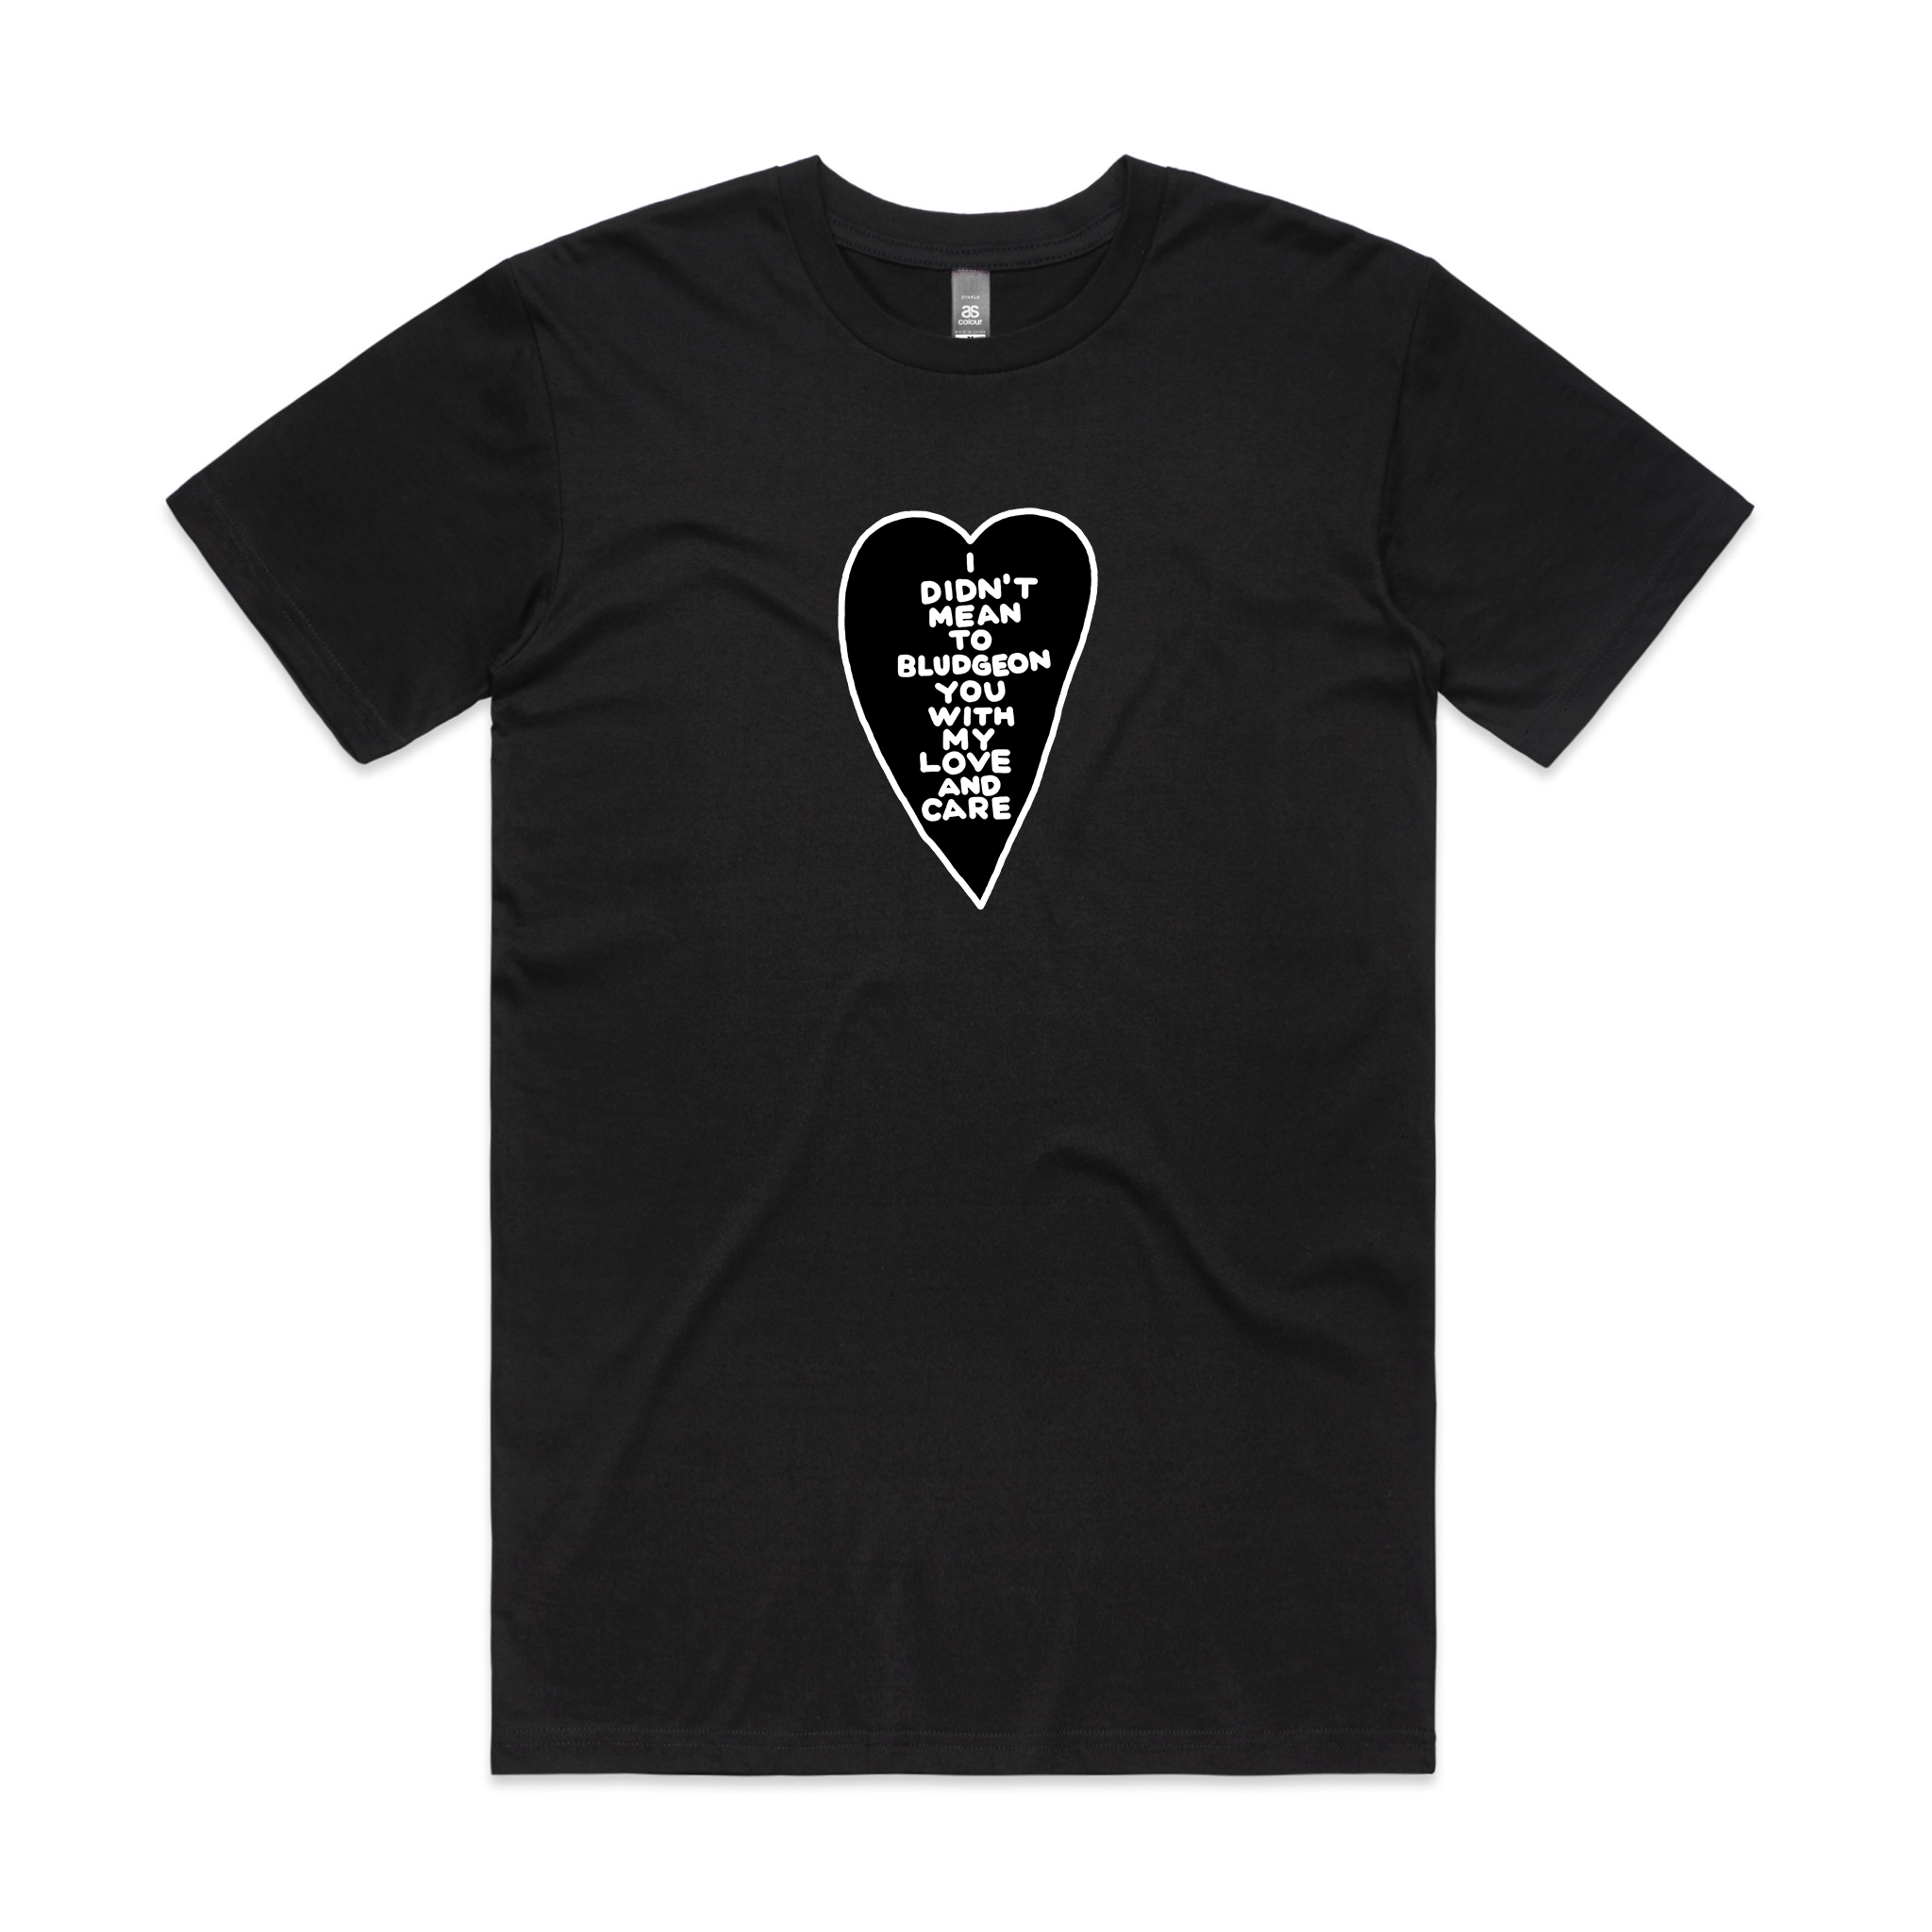 Bludgeon You With Love Tee